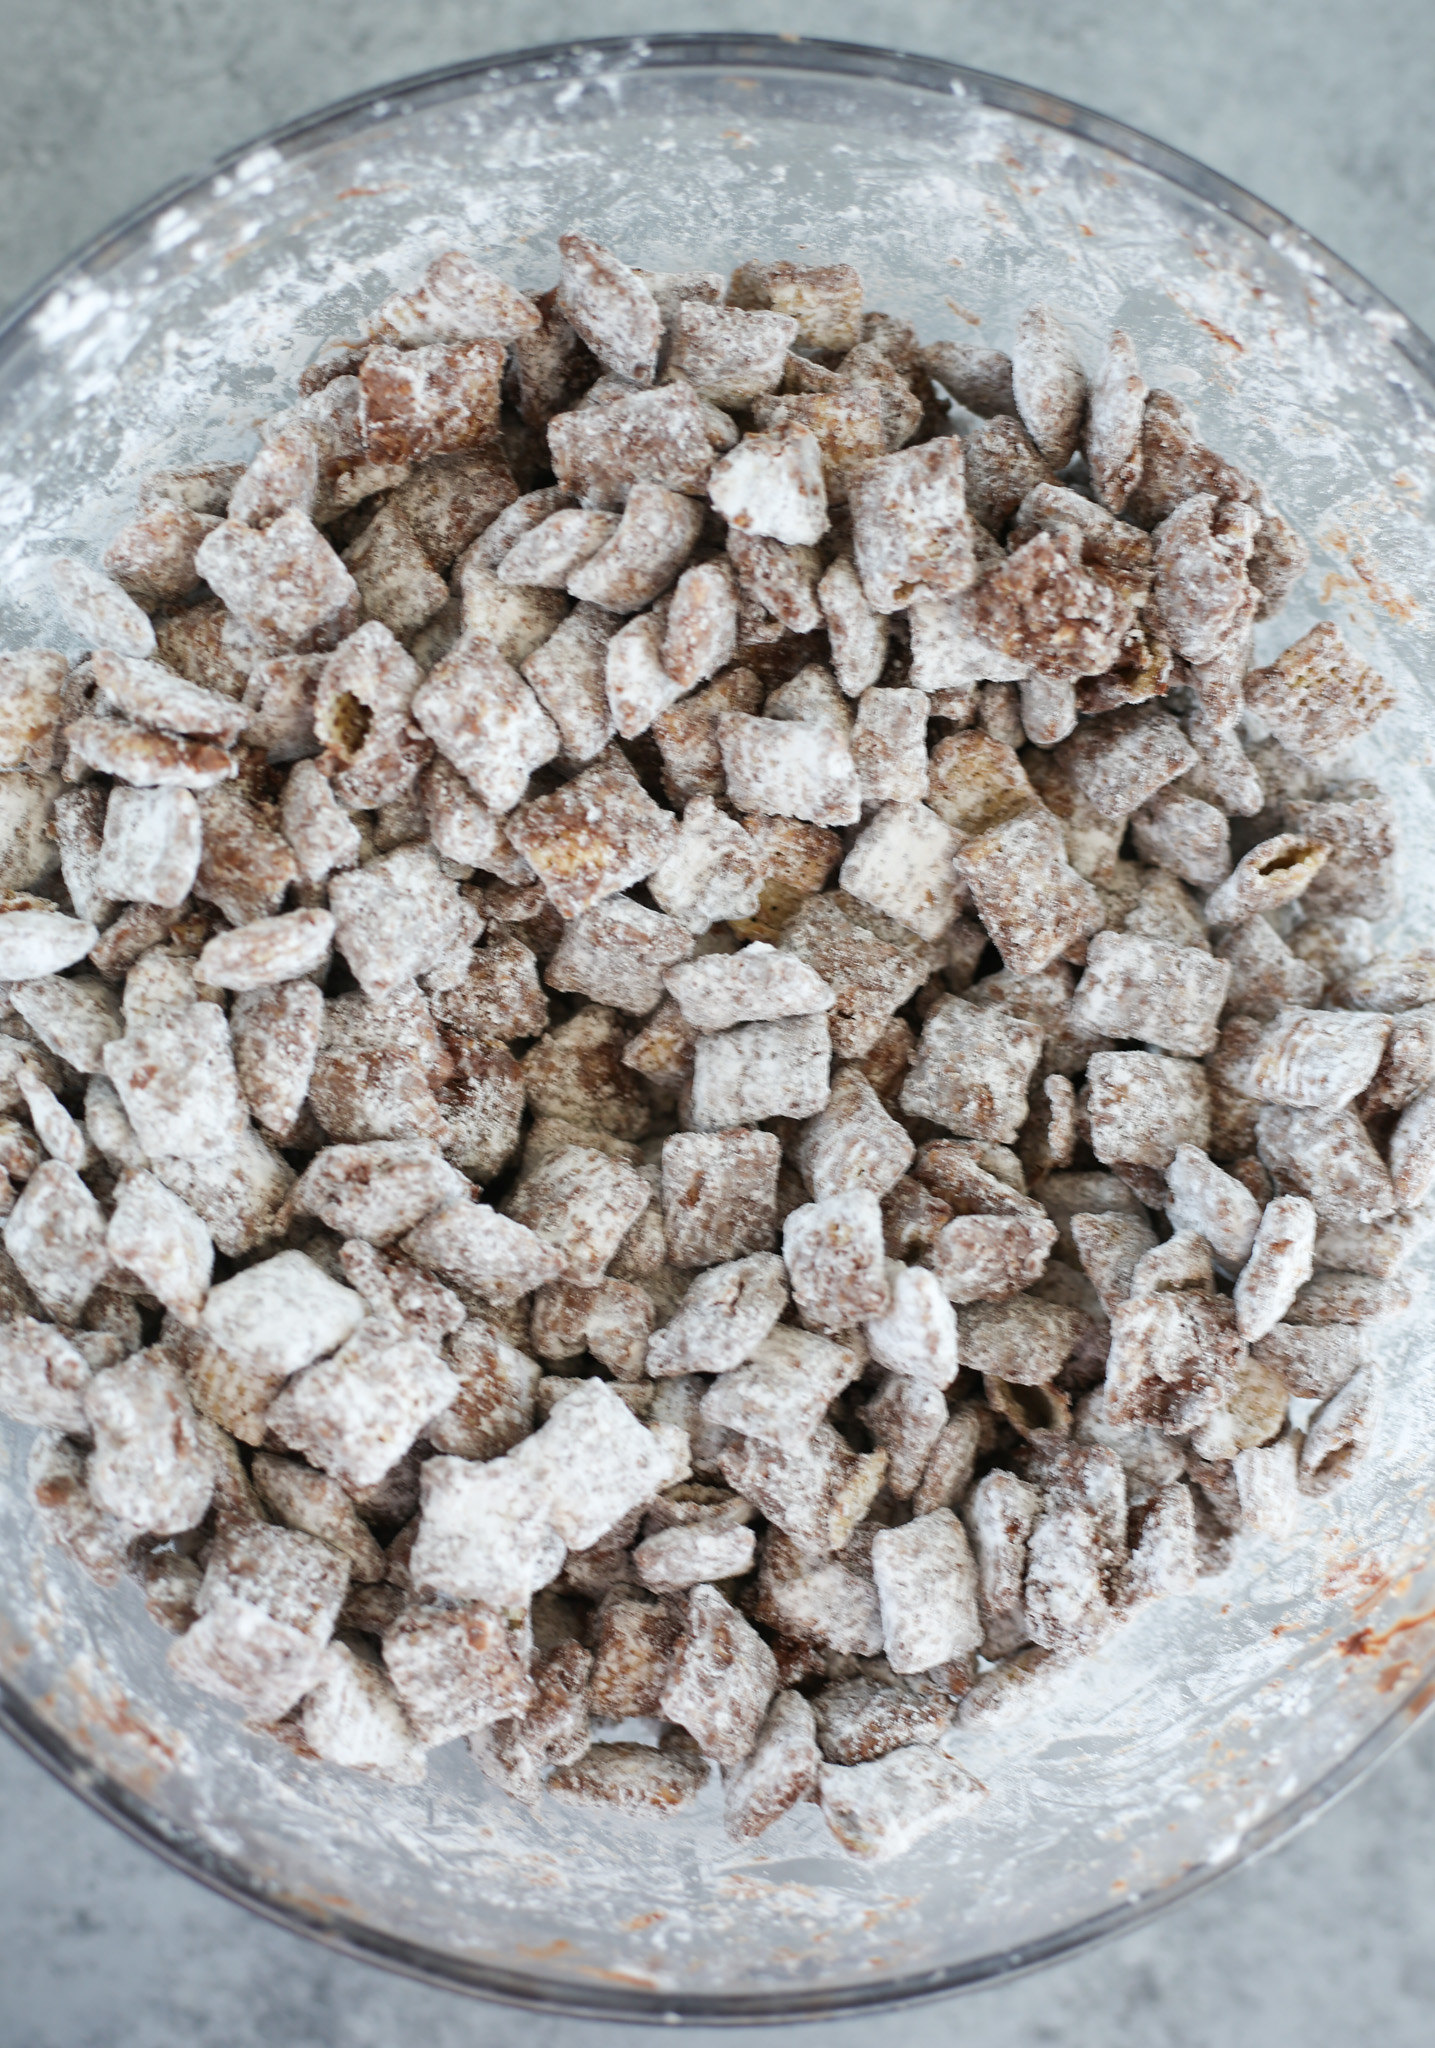 Overhead shot of puppy chow being made